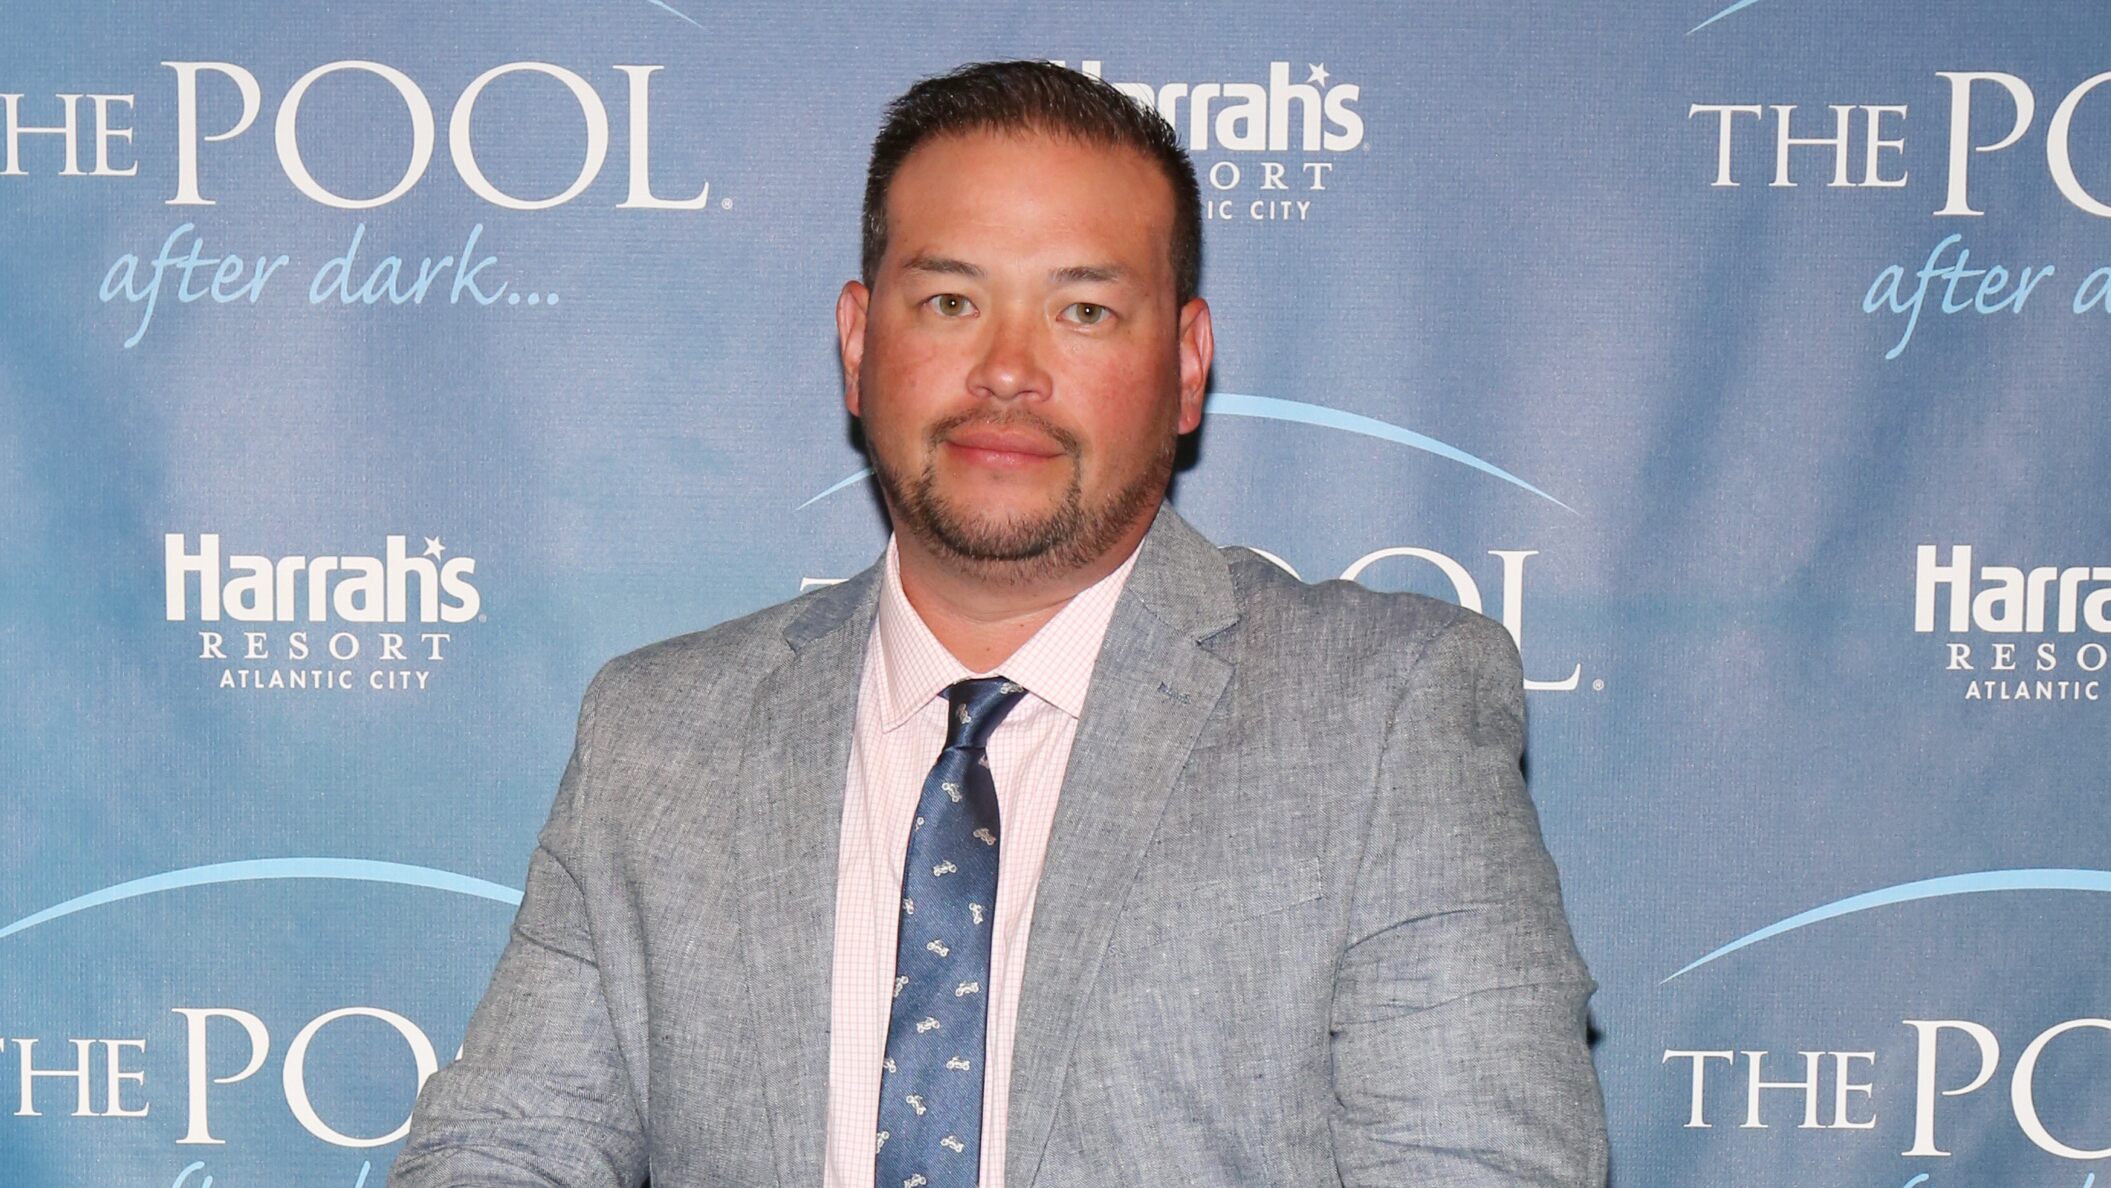 Jon Gosselin takes son Collin to get Christmas tree months after he alleged ex-wife Kate 'abused' teen - www.foxnews.com